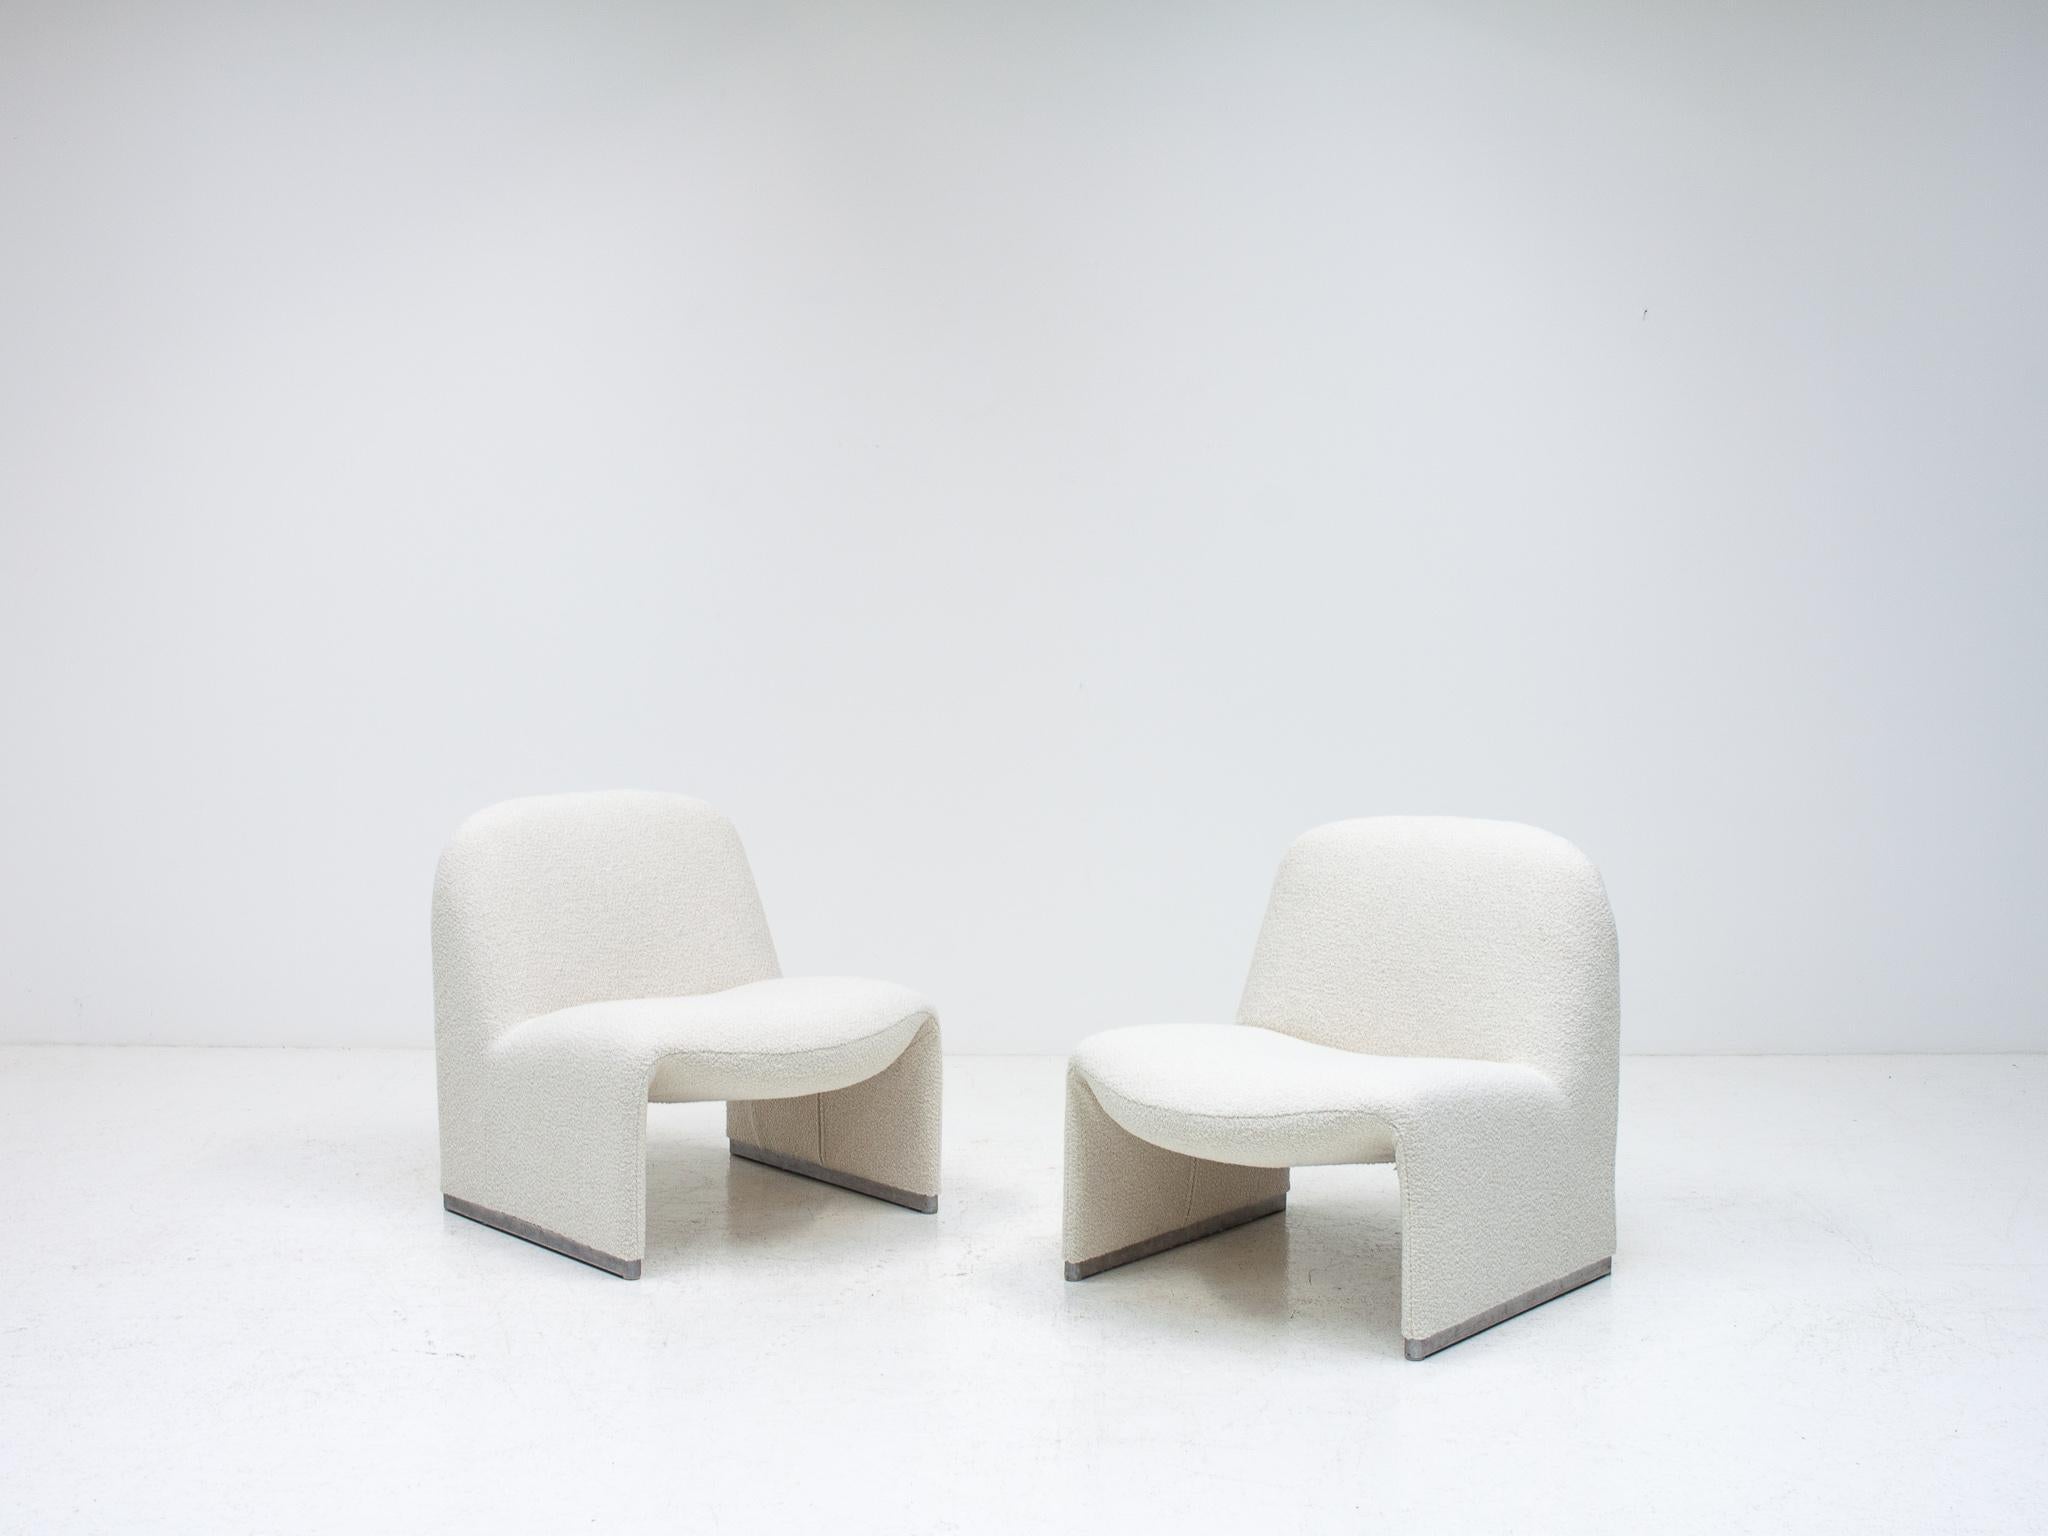 Steel Giancarlo Piretti “Alky” Chairs In Yarn Collective bouclé *Customizable* For Sale